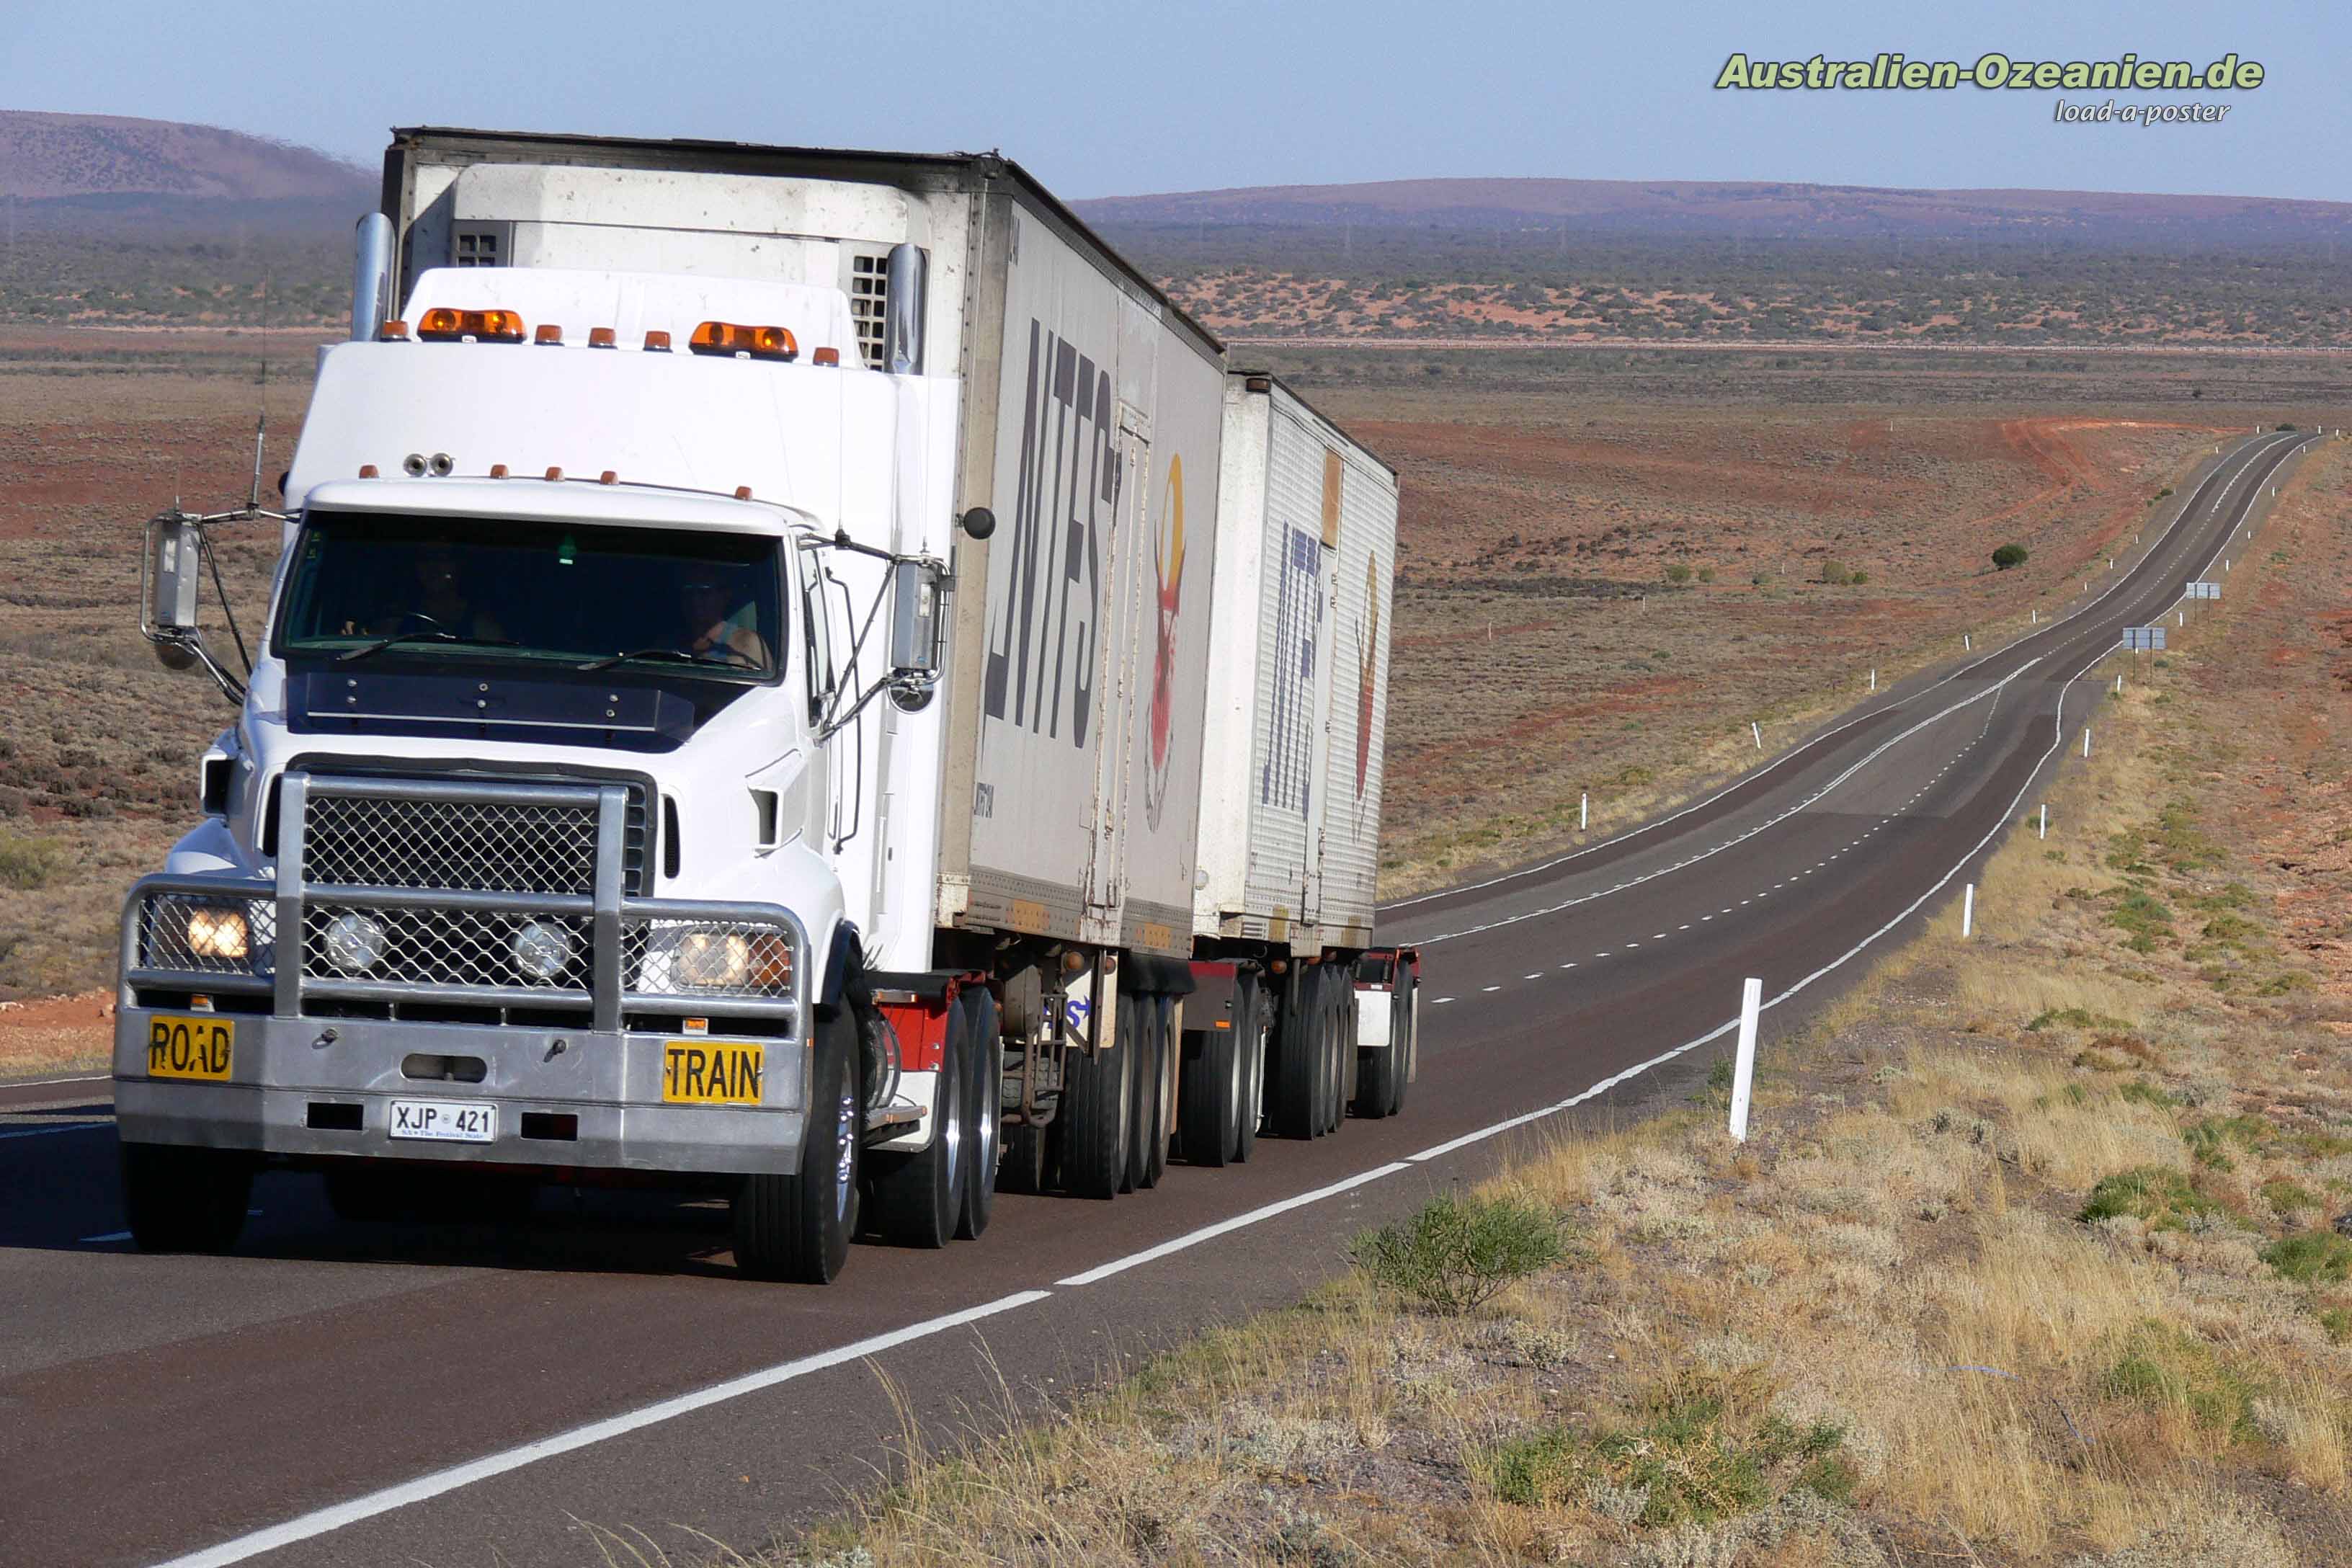 Road Train at the outback